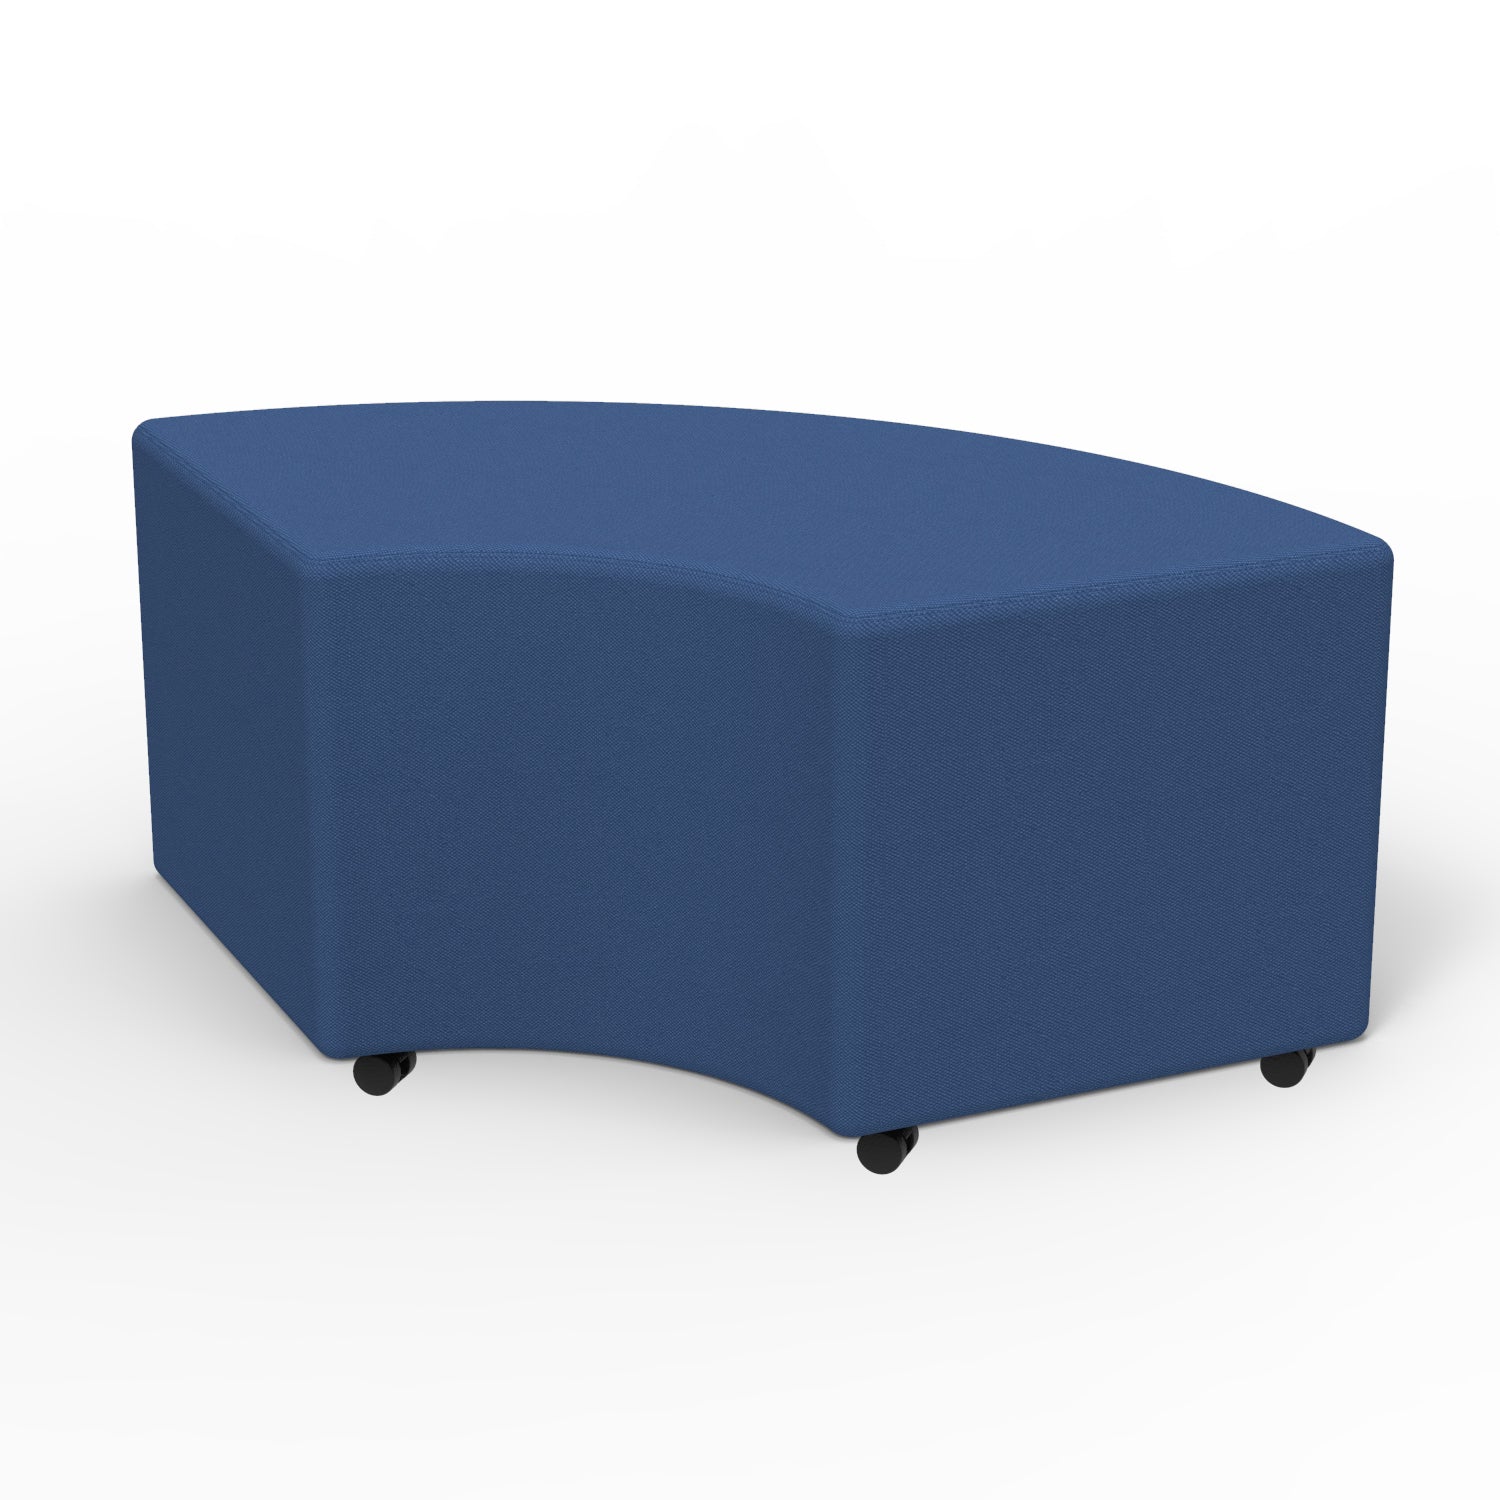 Sonik Soft Seating 24" Curved Bench, 18" H